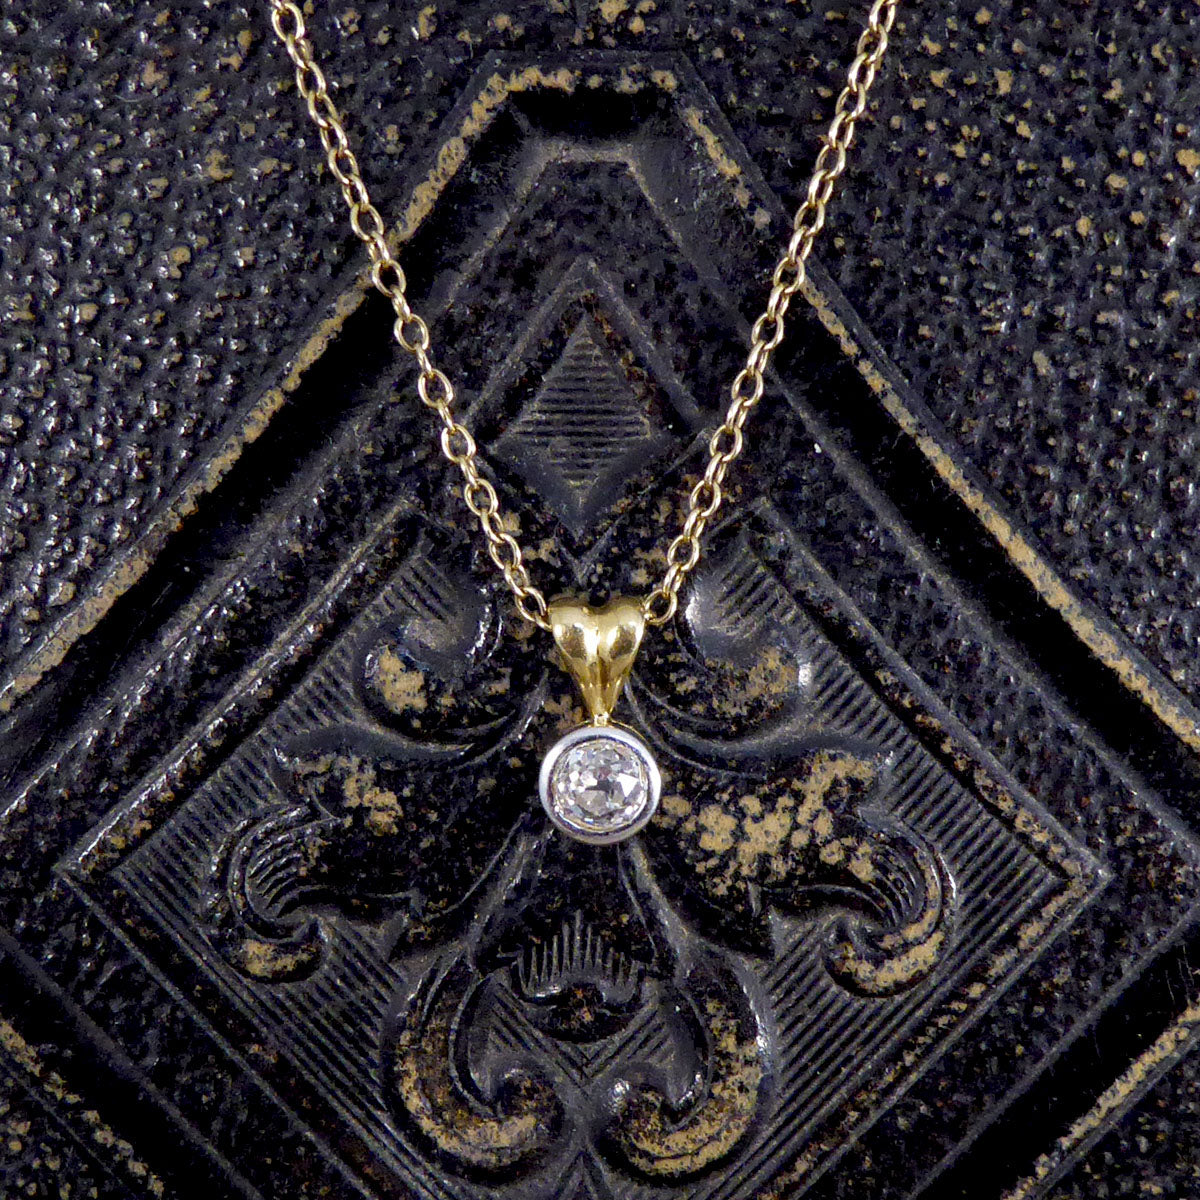 Vintage 0.50ct Old Cut Diamond Rub Over Pendant in 18ct White and Yellow Gold with 9ct Yellow Gold Chain